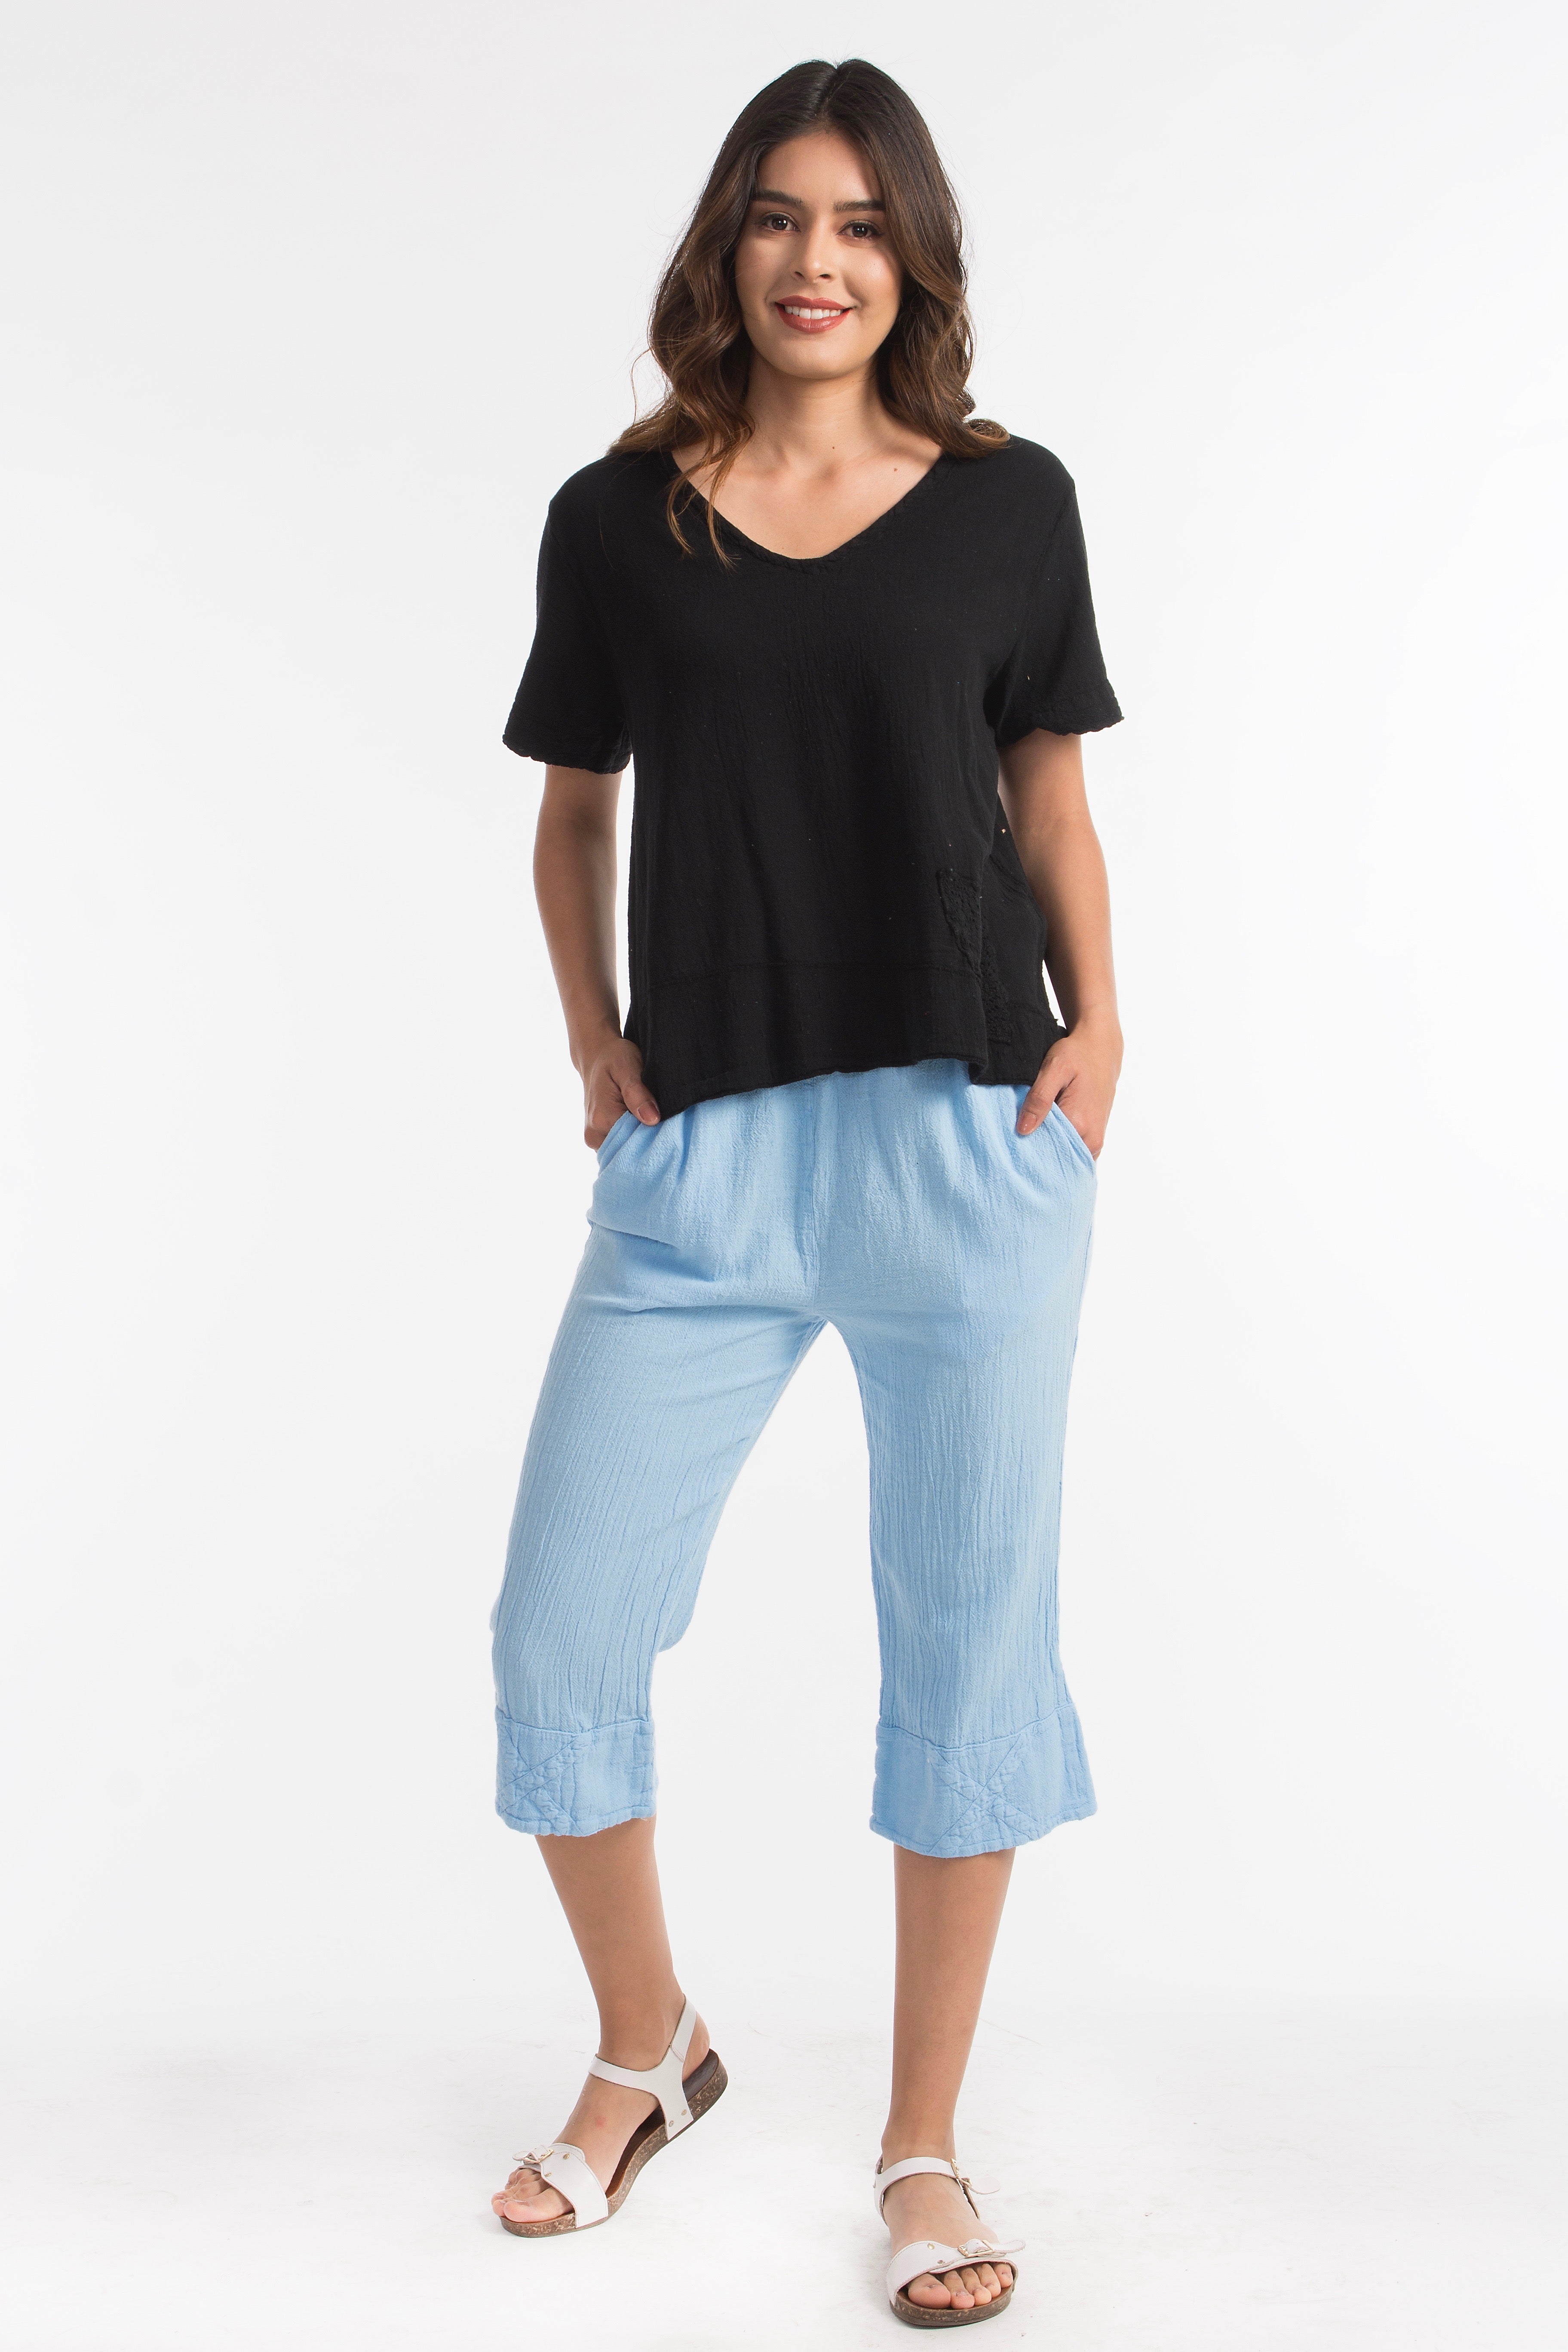 Auggy our Easy Capri with Pockets!